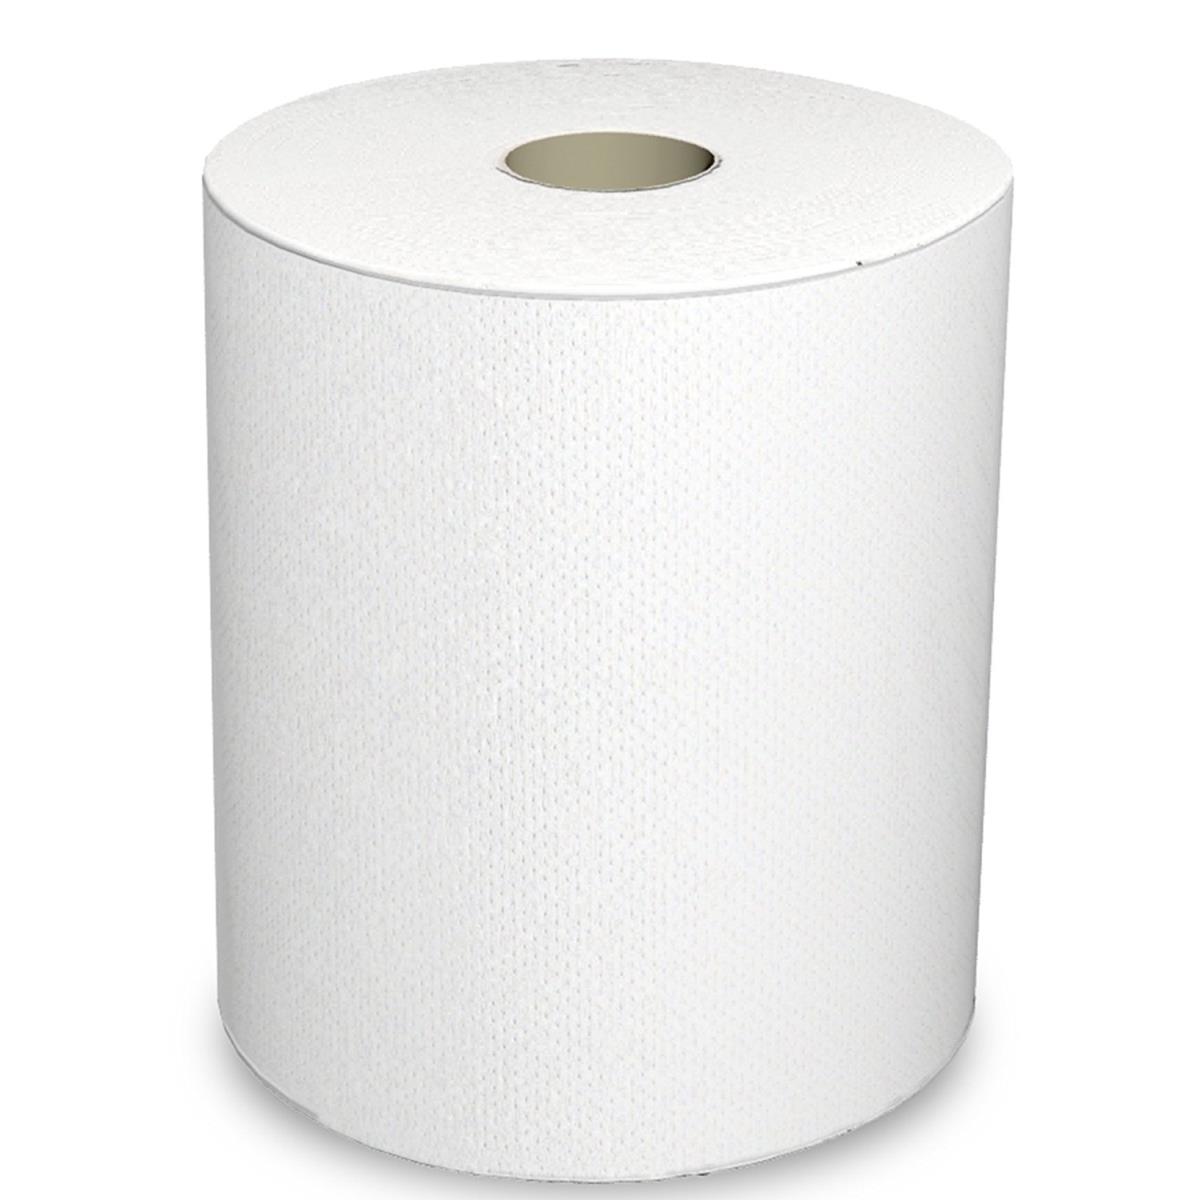 46530 Pec 8 In. X 600 Ft. White Hard Wound Roll Towels - Pack Of 6